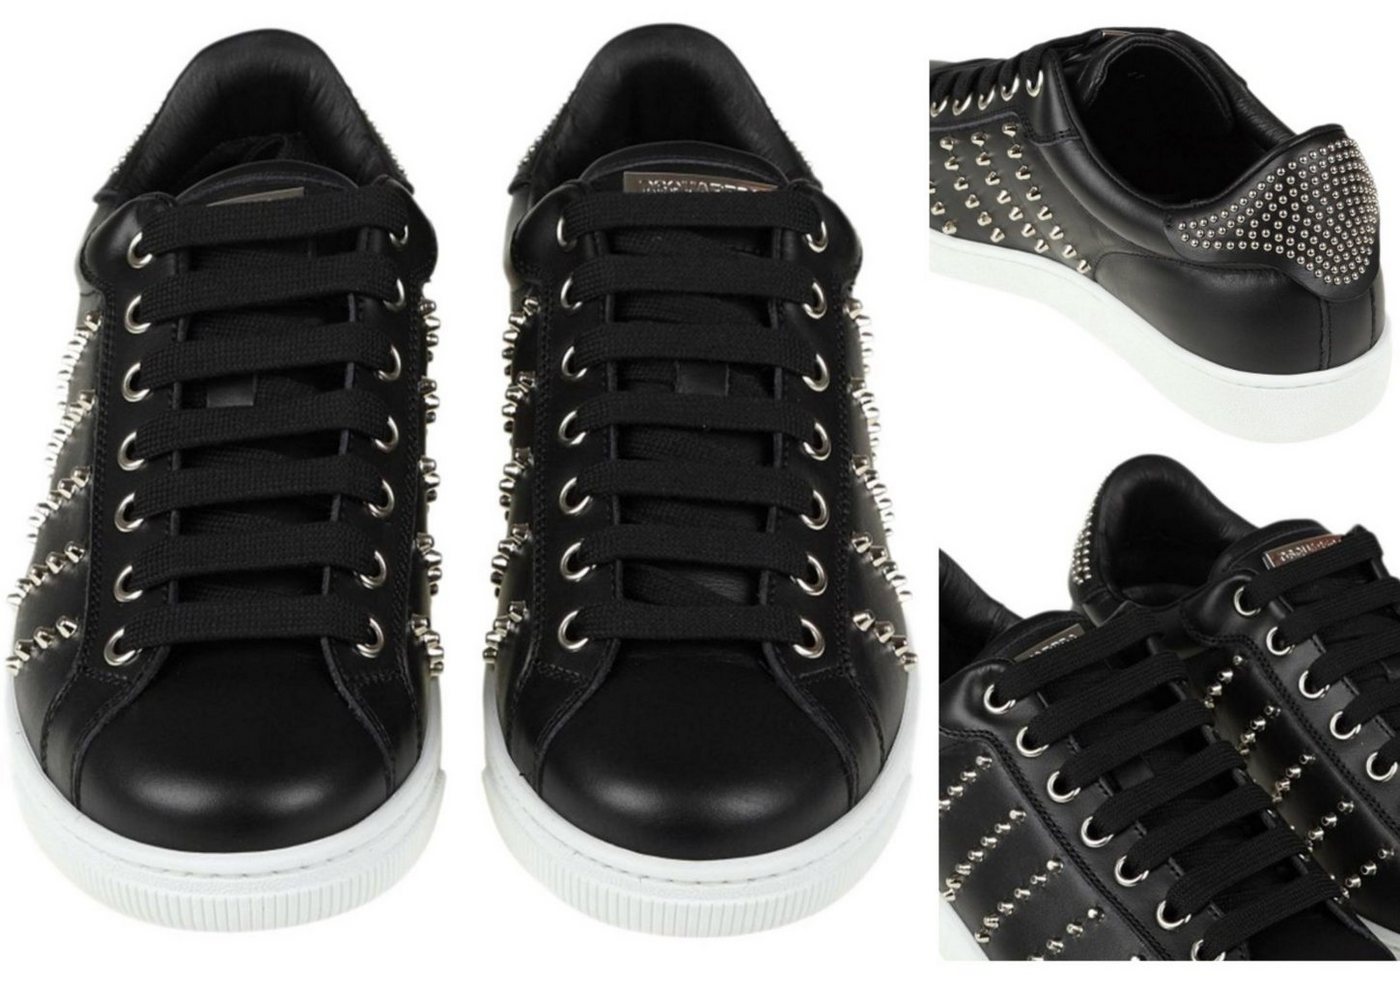 Dsquared2 DSQUARED2 ICONIC SANTA MONICA STUDS SNEAKERS TRAINERS SCHUHE SHOES NEW Sneaker von Dsquared2